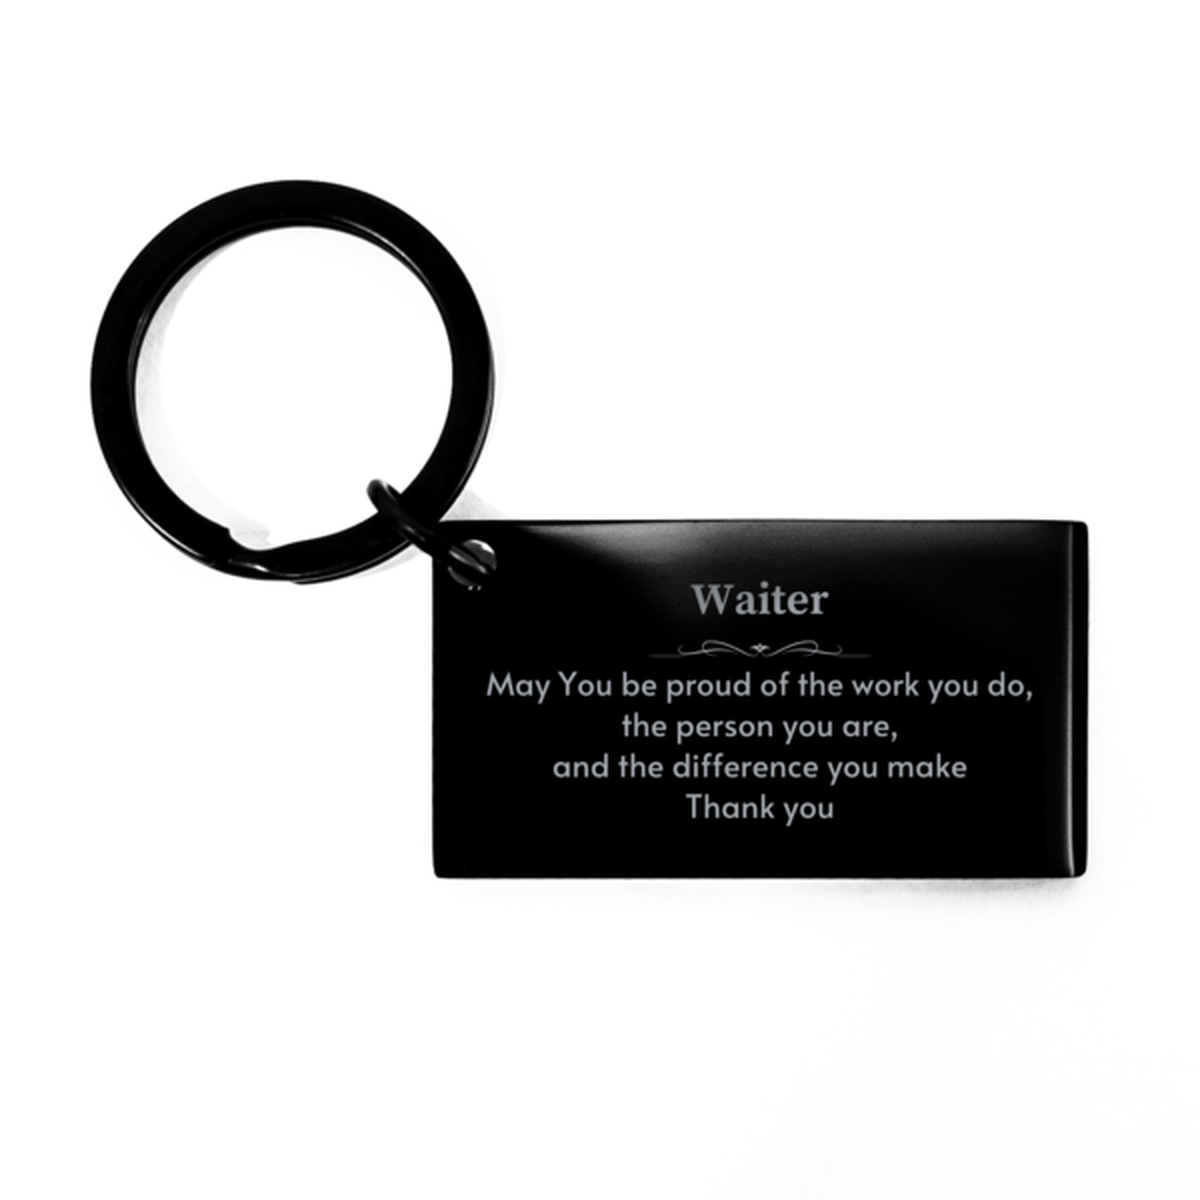 Heartwarming Keychain Retirement Coworkers Gifts for Waiter, Anesthesiologist May You be proud of the work you do, the person you are Gifts for Boss Men Women Friends